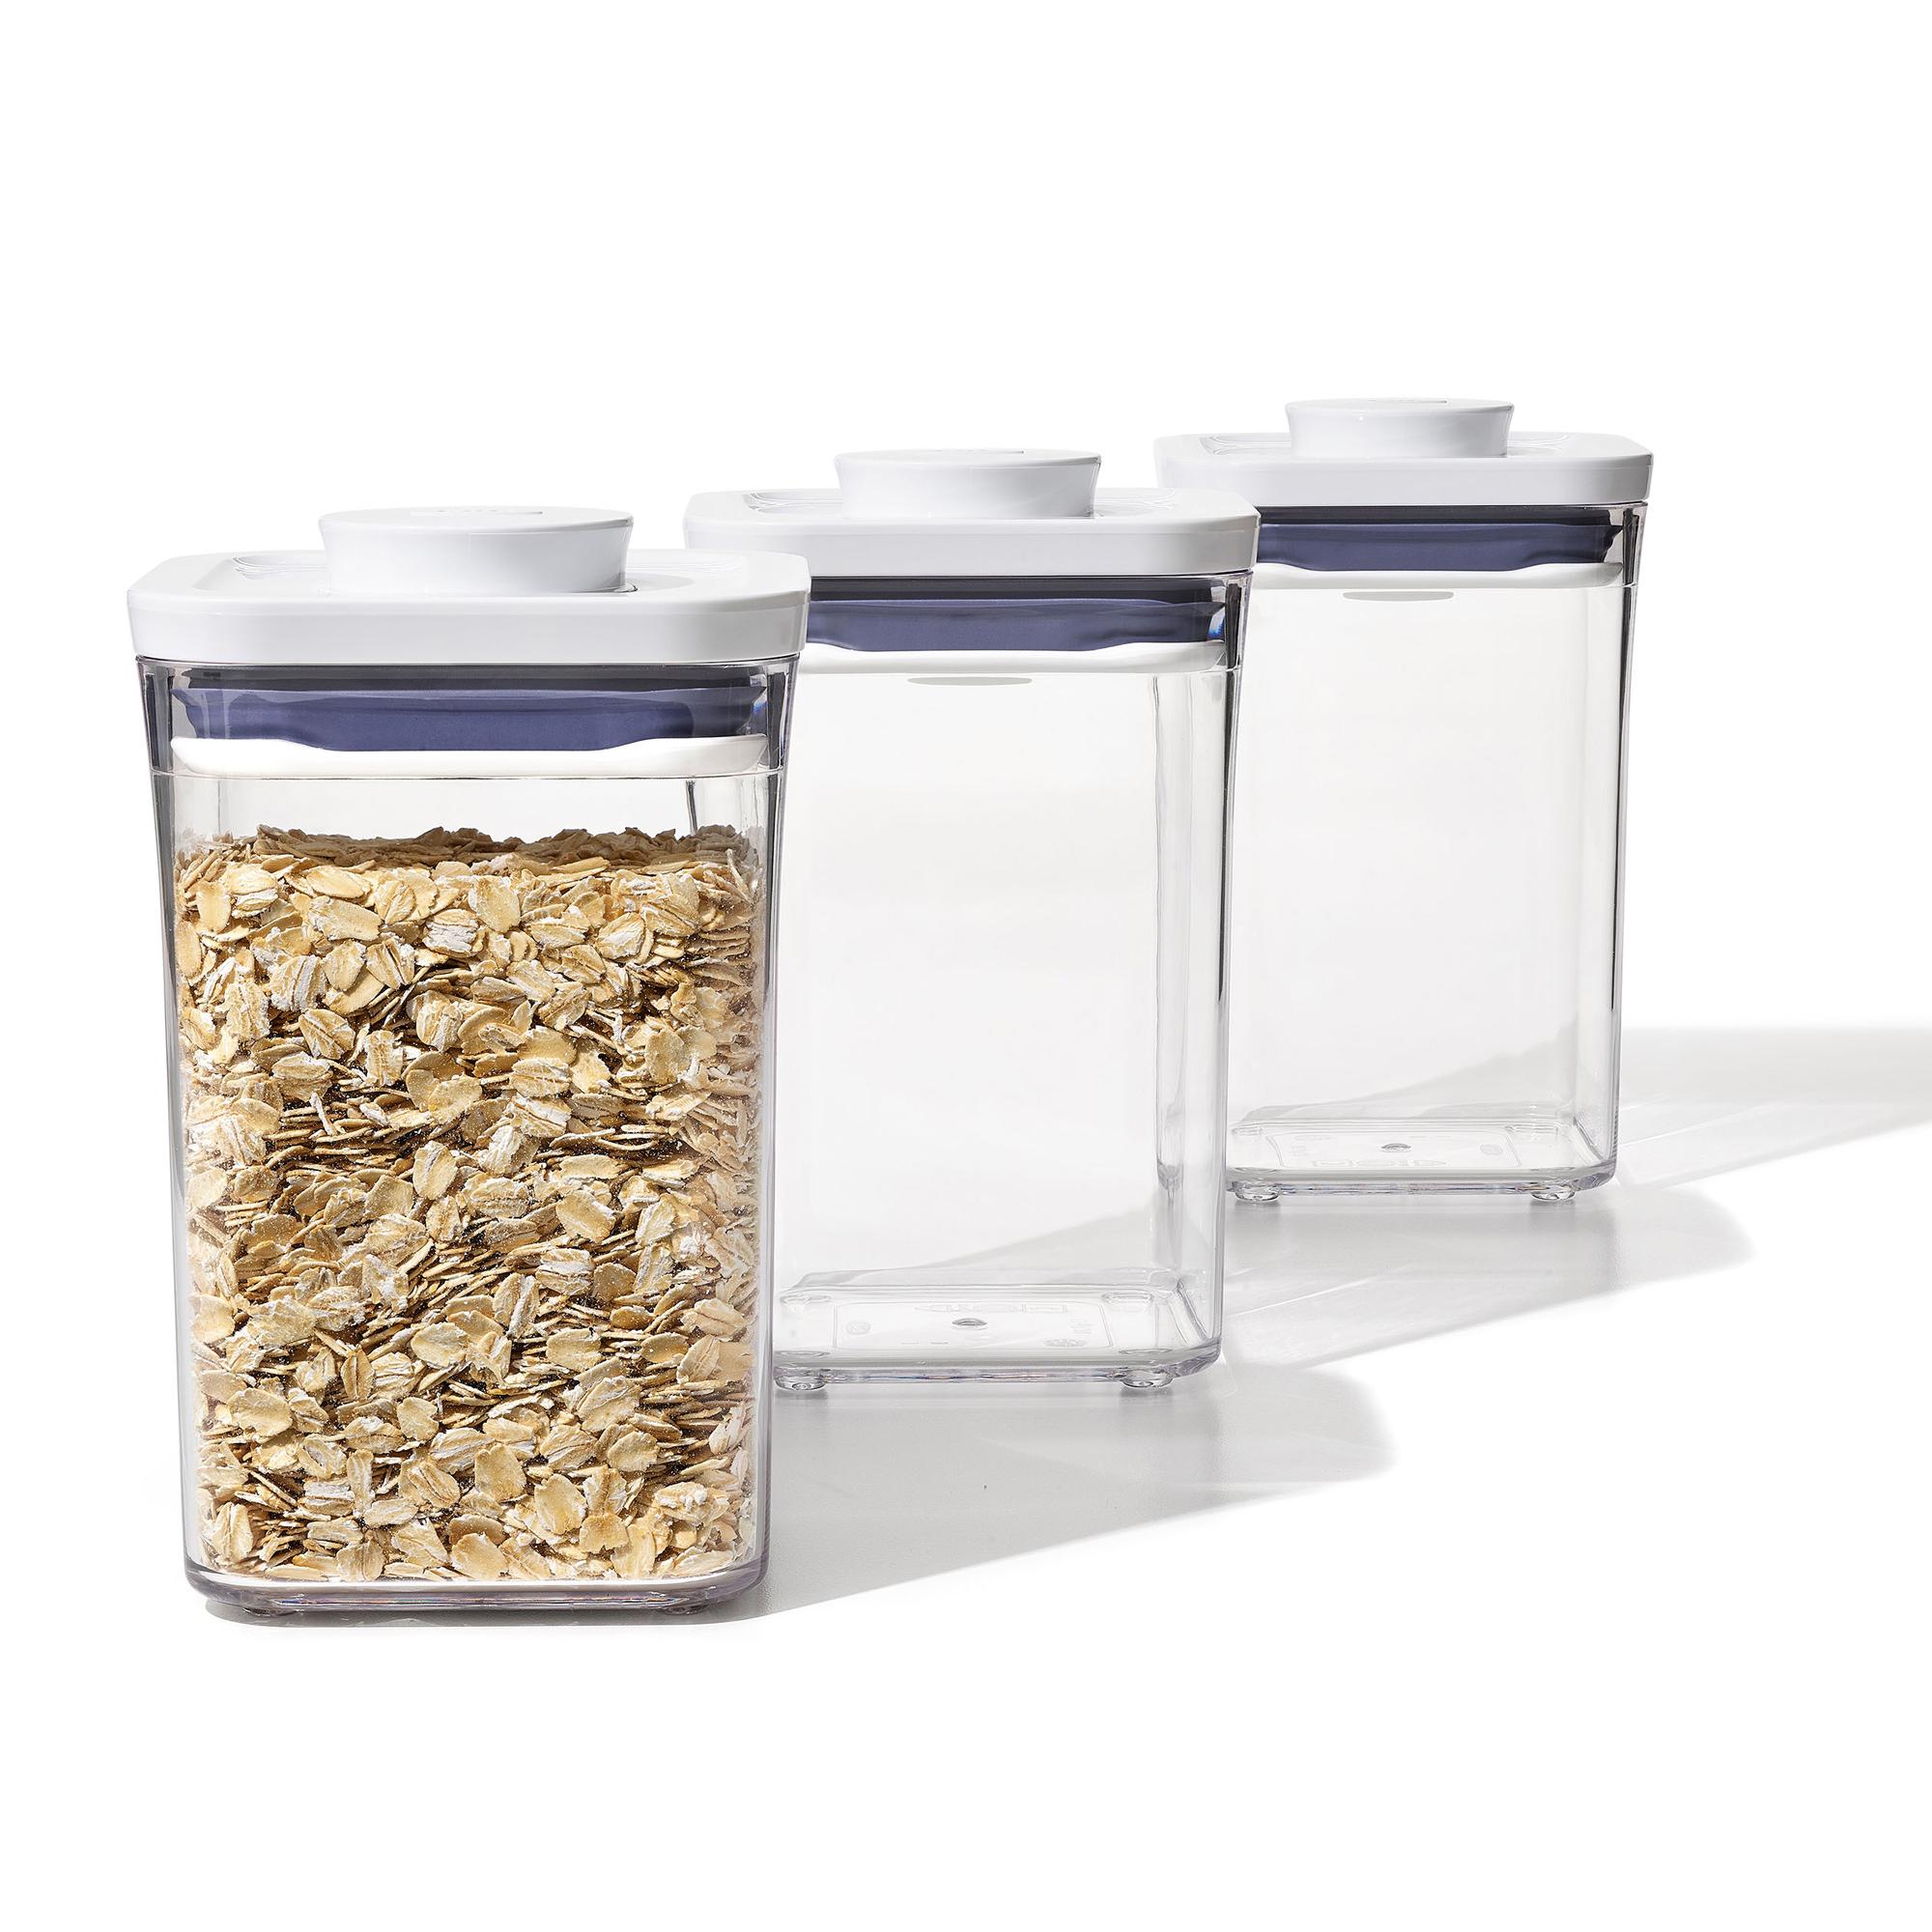 OXO Good Grips Square Pop 2.0 Container Set 3pc Image 4